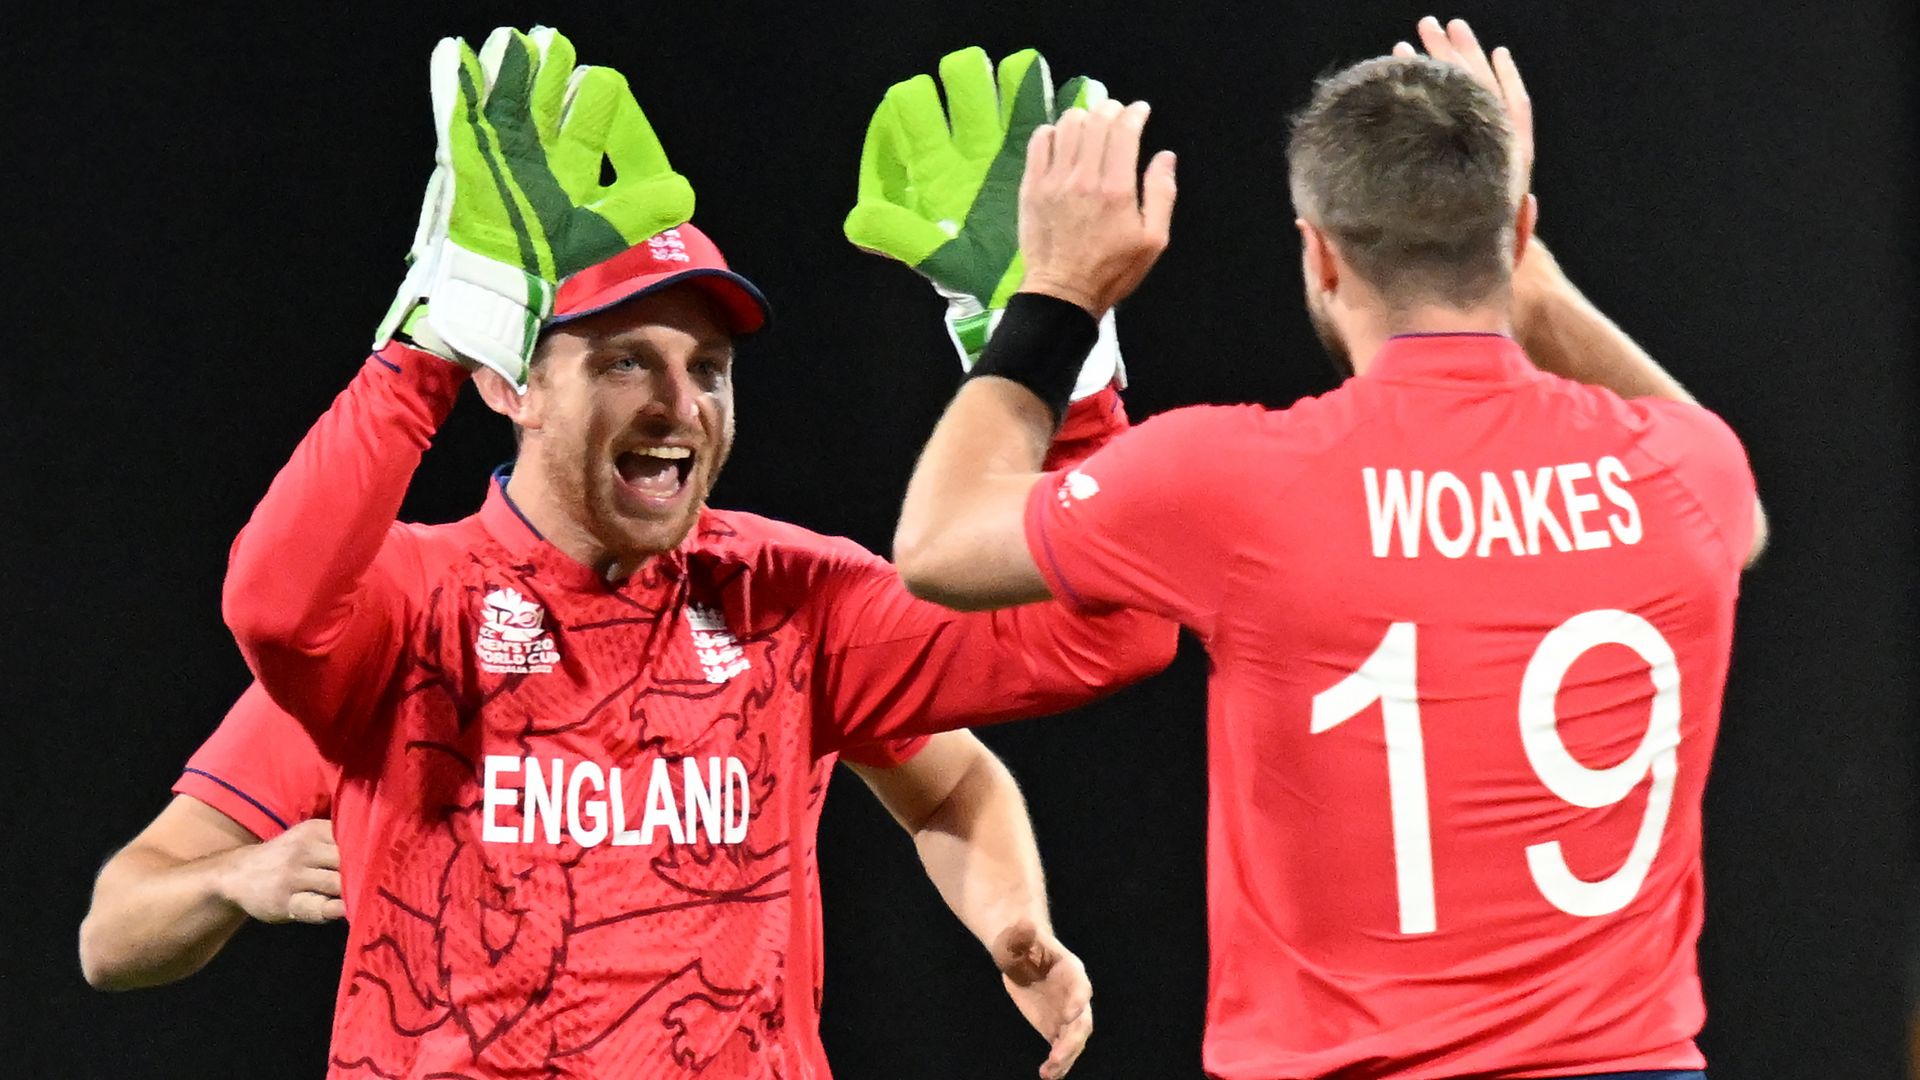 England boost semi-final hopes with win over New Zealand